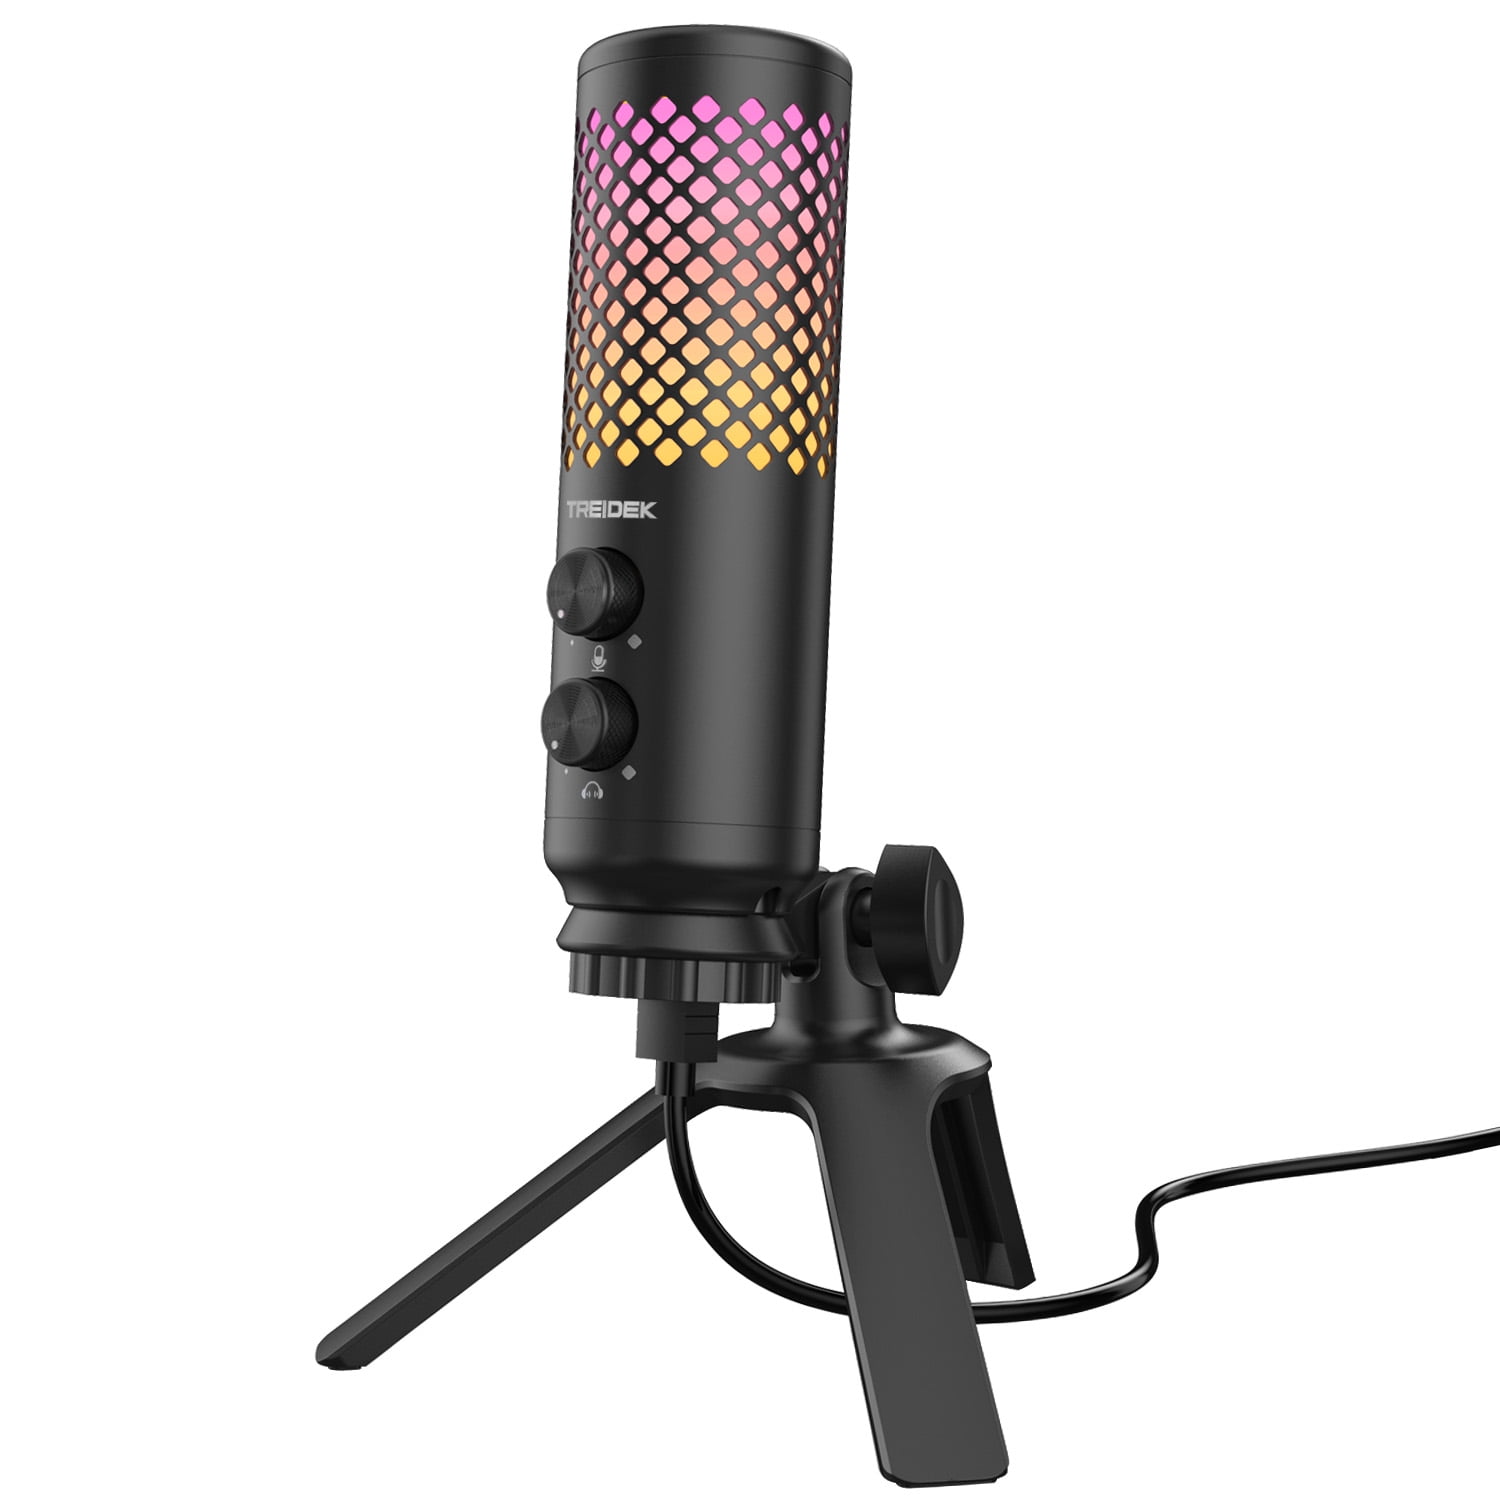 Rig mand Modstander mistet hjerte TREIDEK USB Microphone RGB Condenser Computer Microphone Kit with RGB  Lights, Mute Button, Tripod, Shock Mount, Plug & Play Gaming Mic for PC,  PS4, PS5 and Mac, Studio Recording Vocals, Voice Overs,